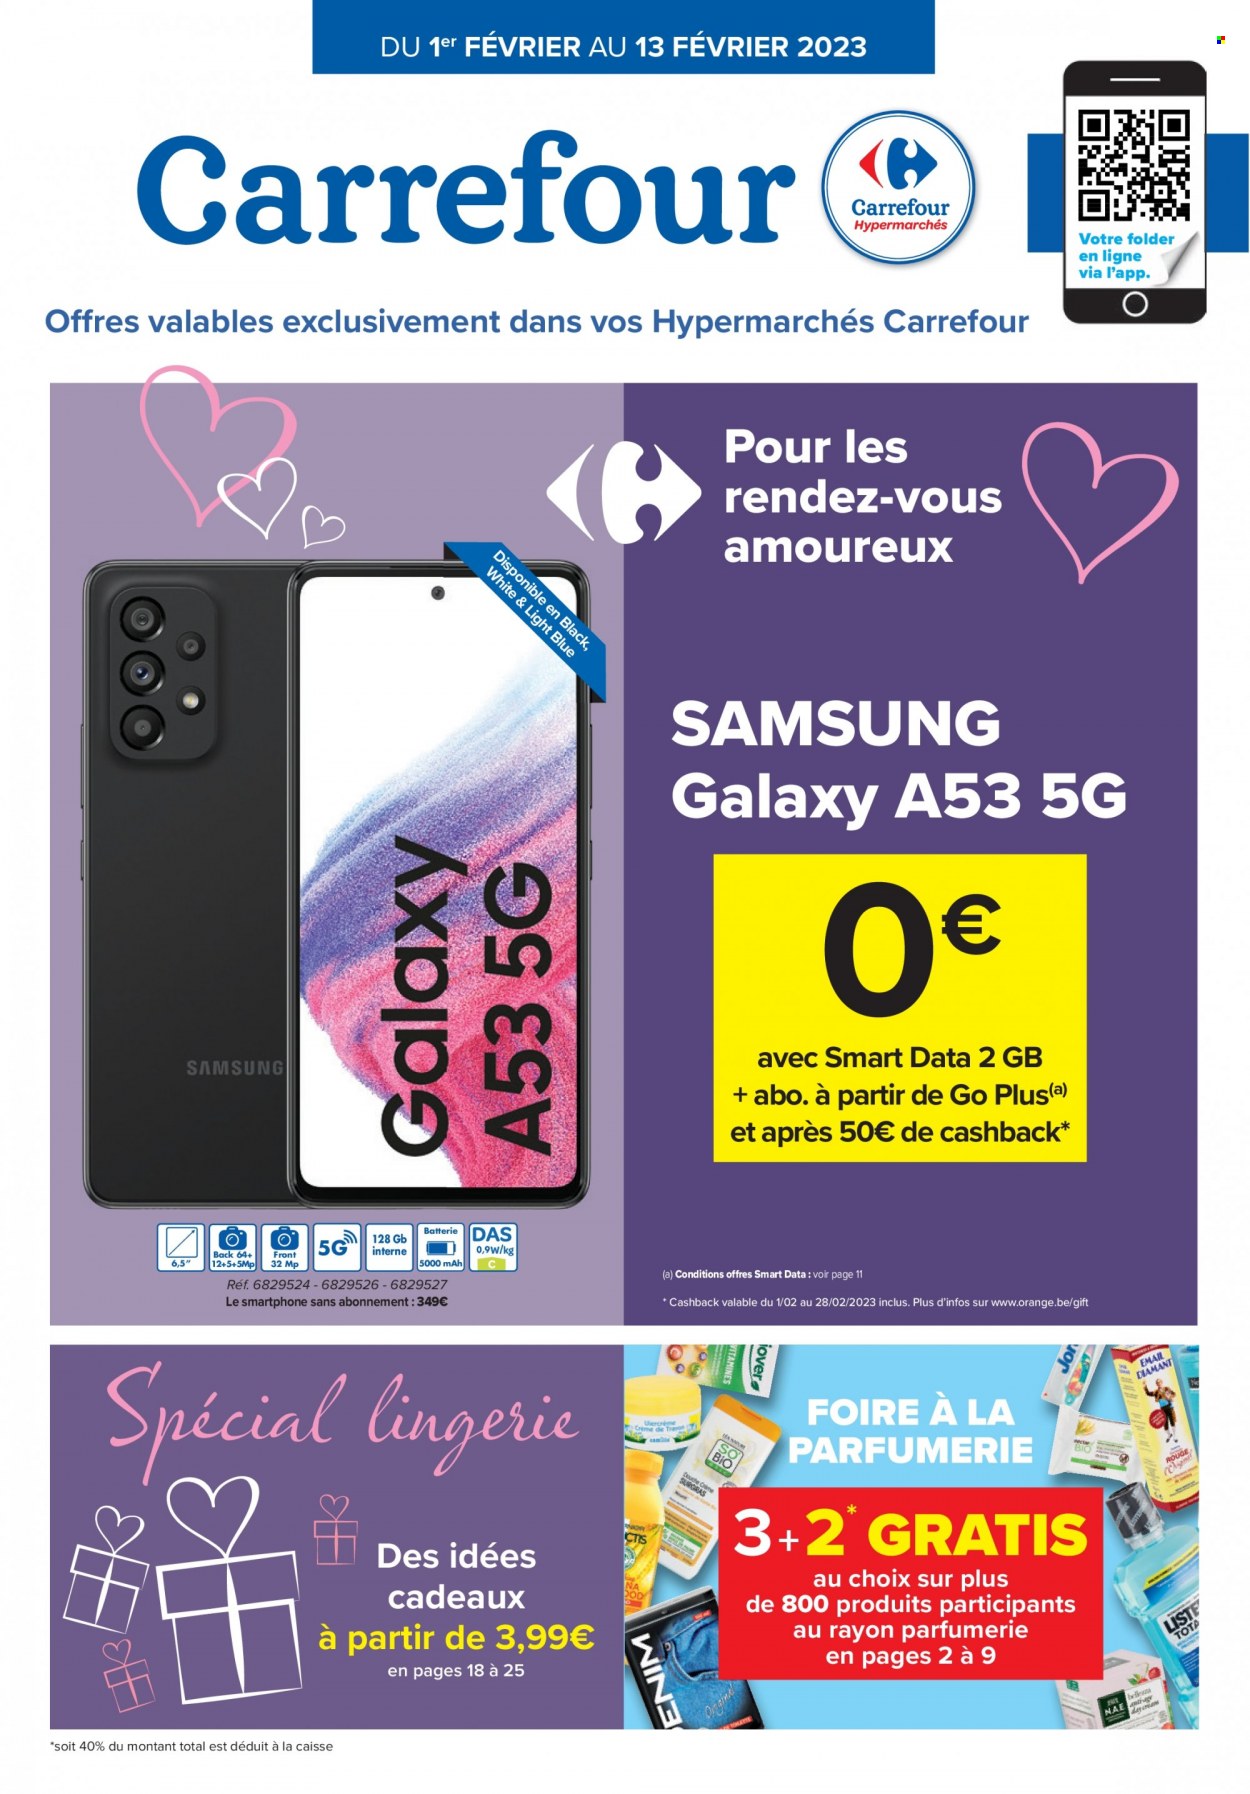 Catalogue Carrefour hypermarkt - 1.2.2023 - 13.2.2023. Page 1.